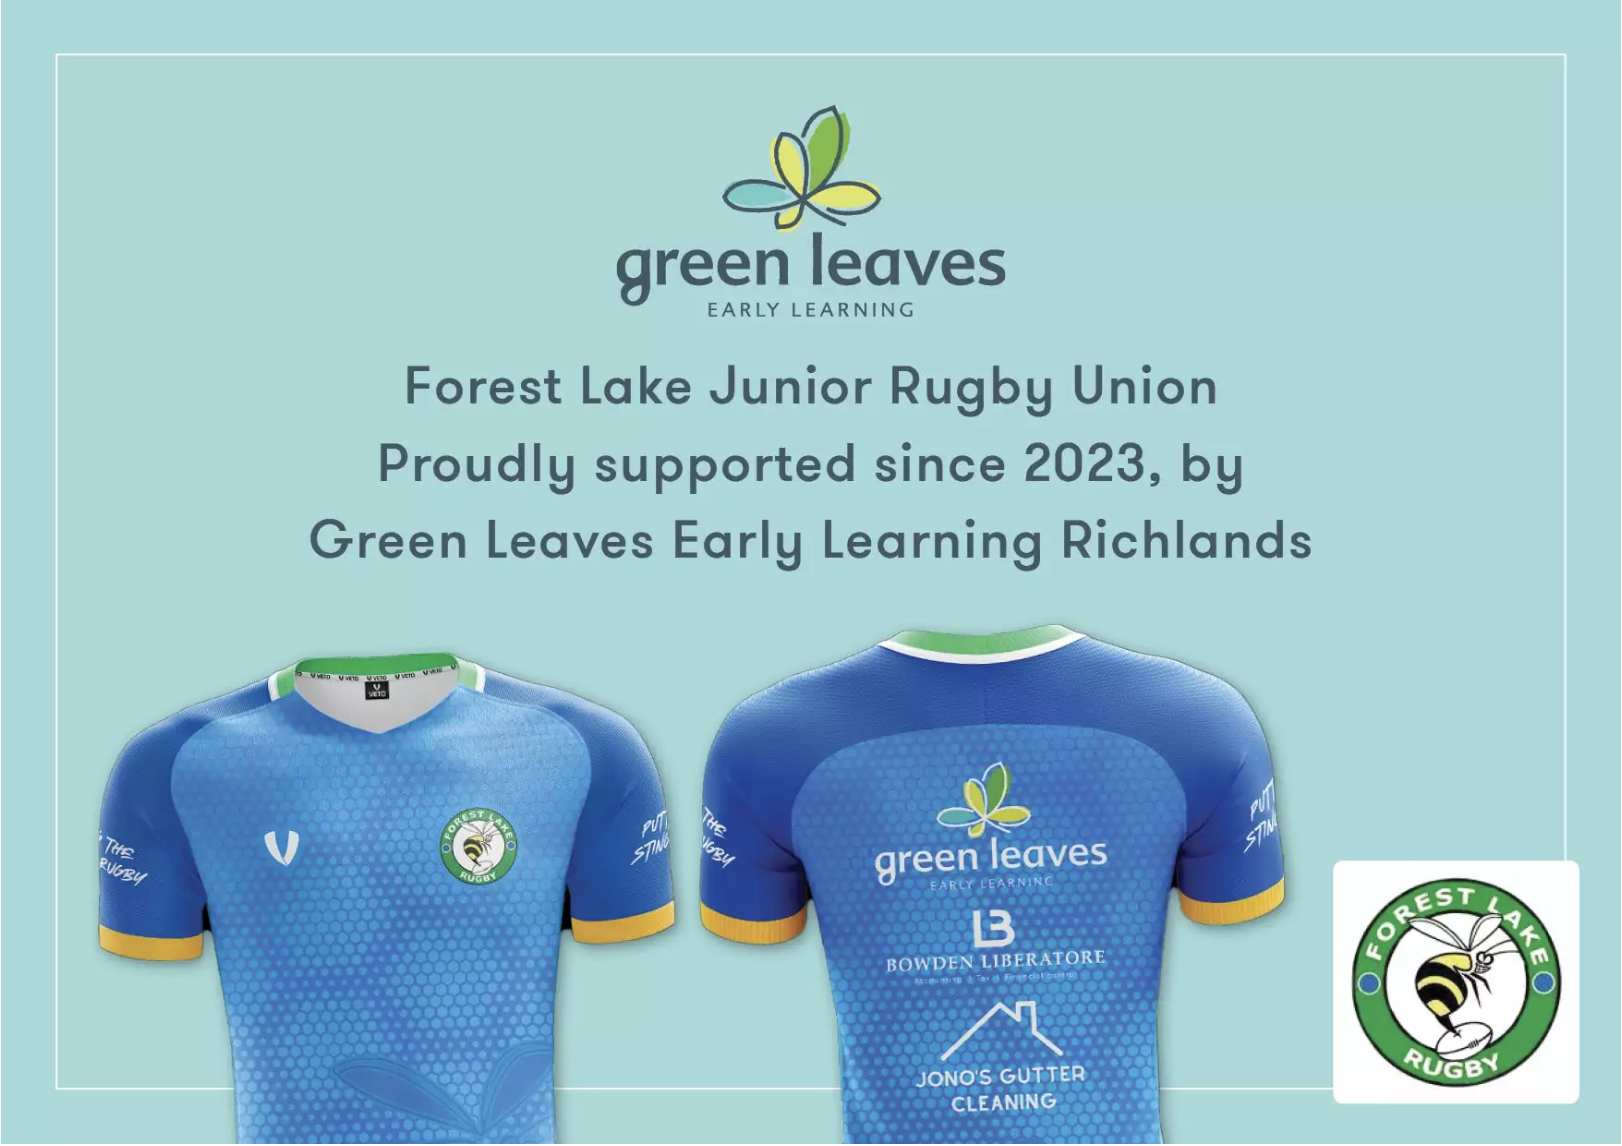 Green Leaves to become Forest Lake Junior Rugby Club